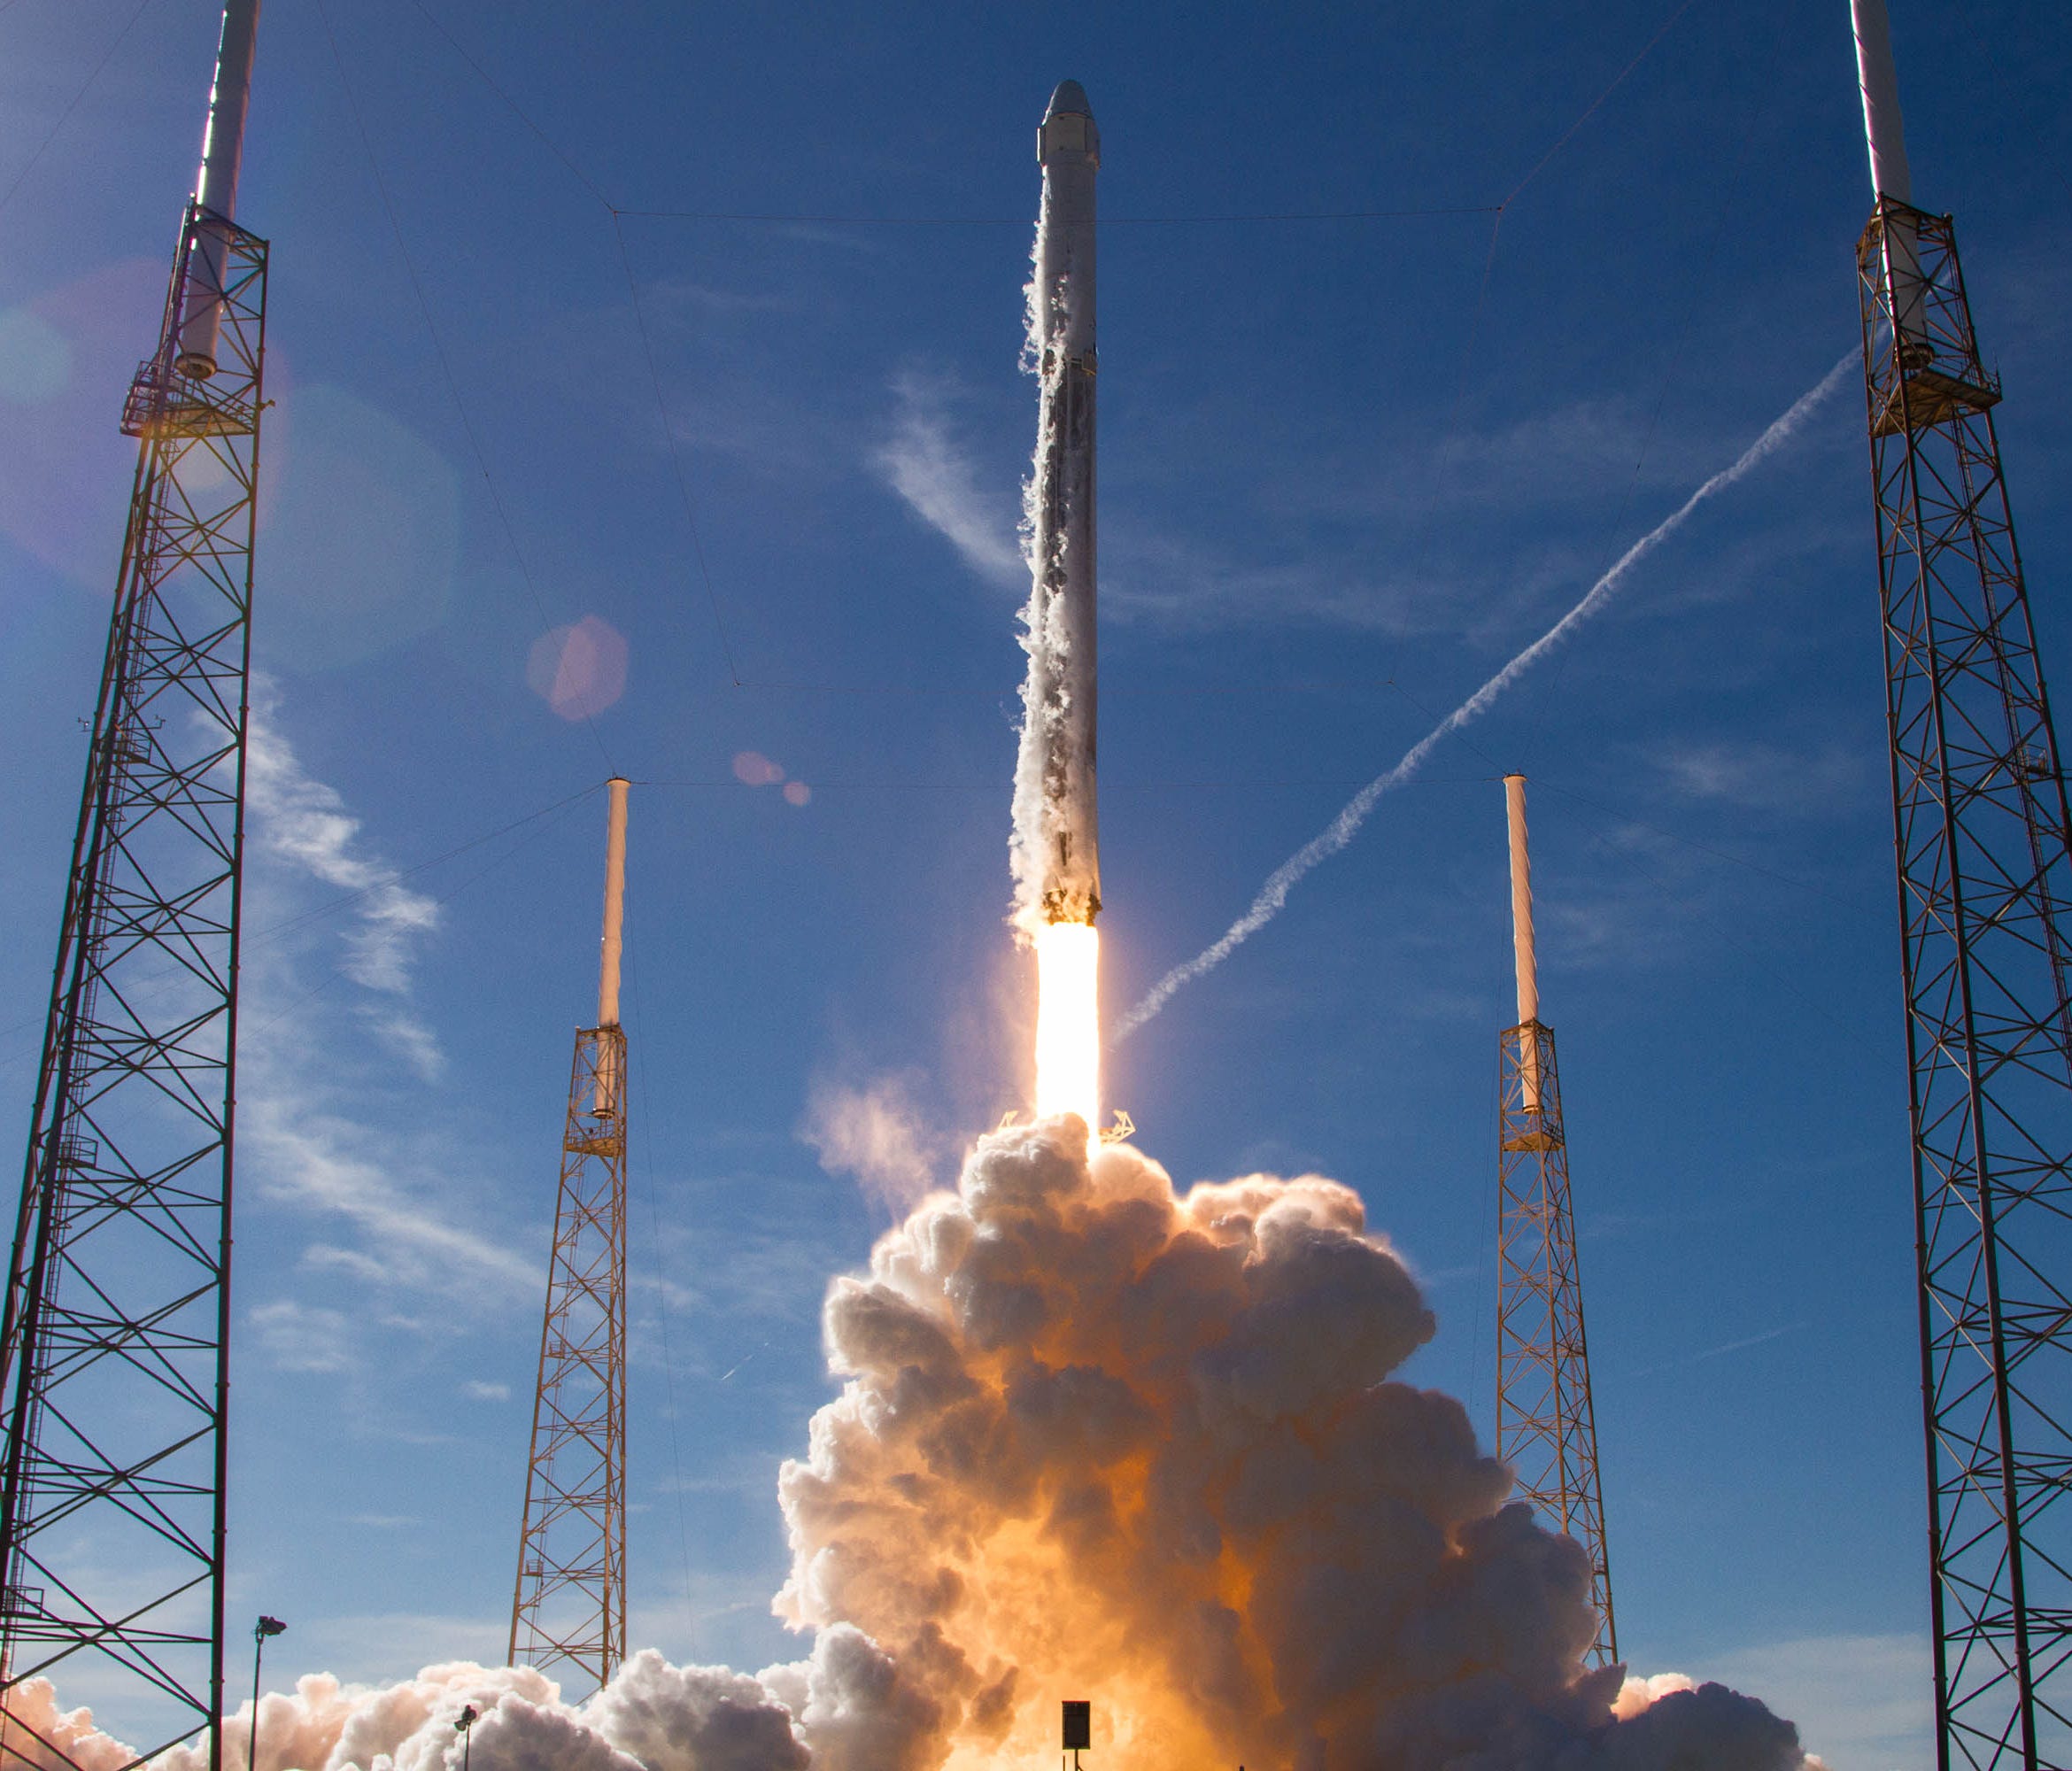 December 2017: A SpaceX Falcon 9 rocket lifts off from Launch Complex 40 at Cape Canaveral Air Force Station with a Dragon spacecraft for the company's 13th mission to the International Space Station.